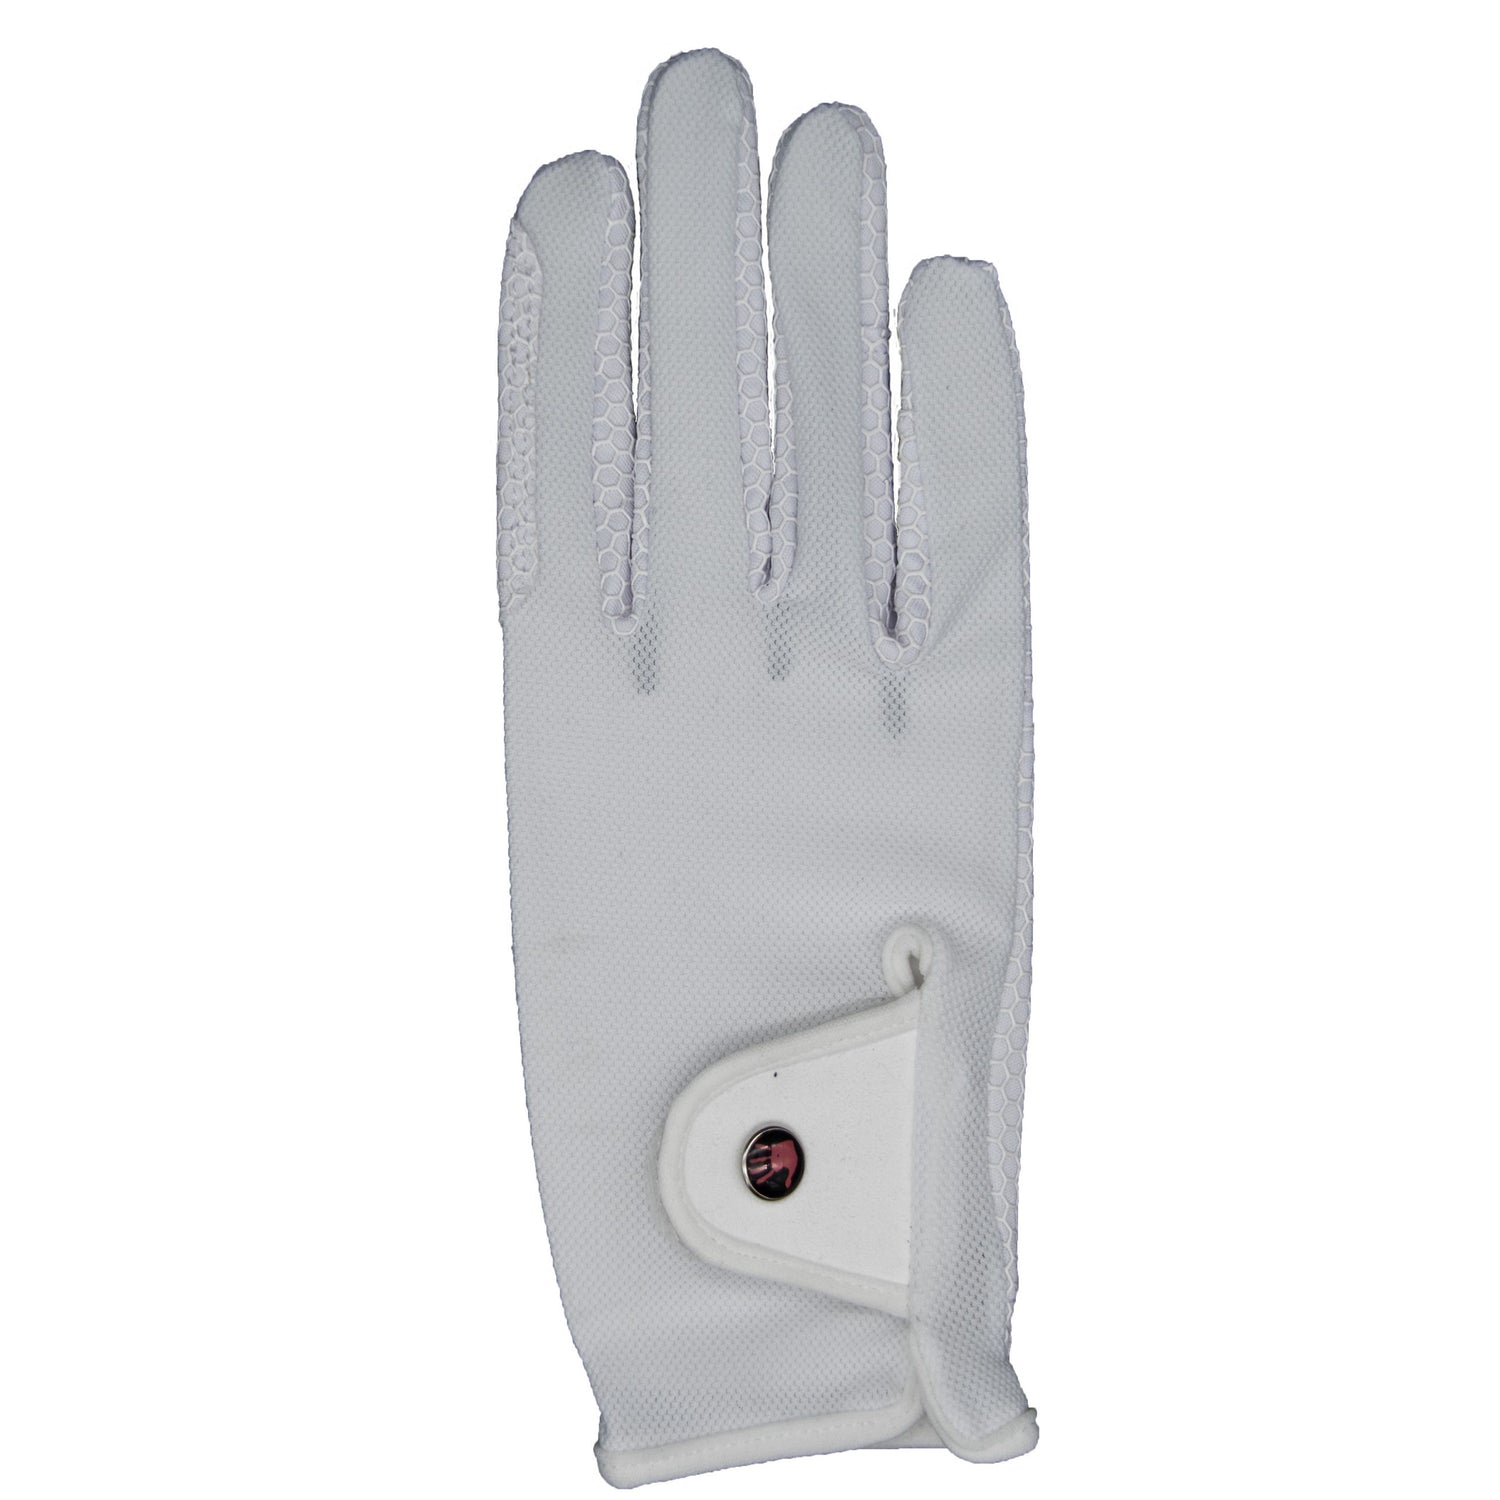 White breathable riding gloves for warm weather